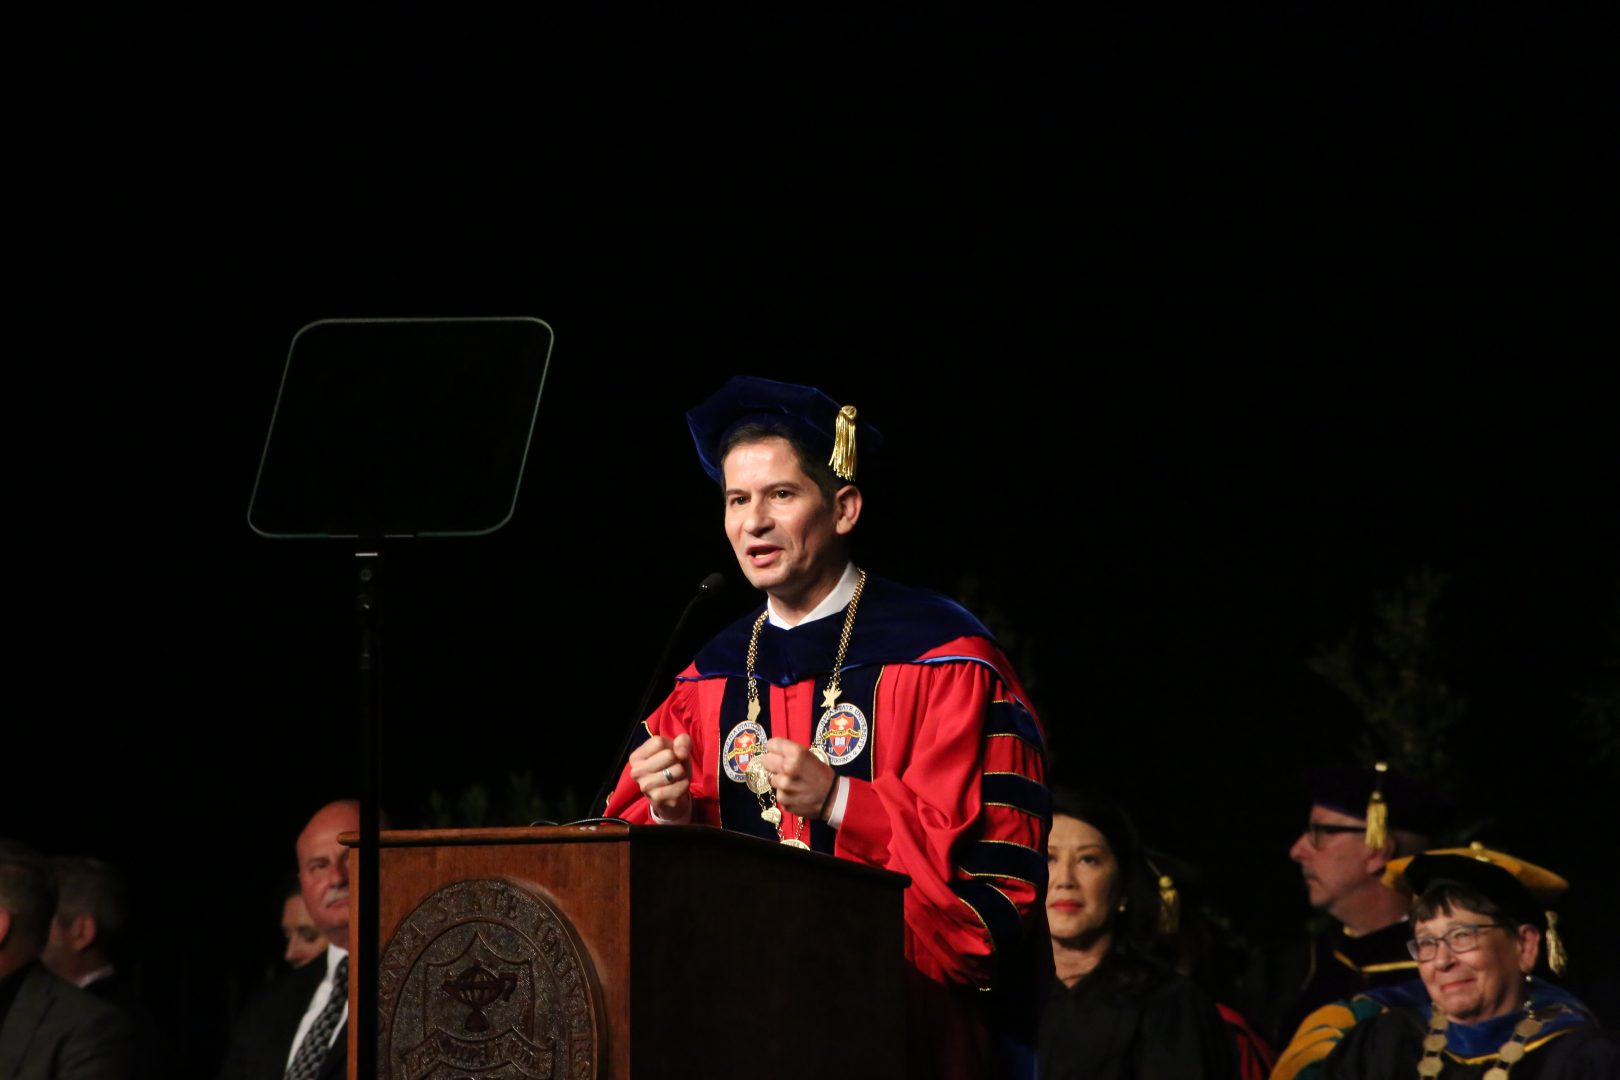 Fresno State President SaÃºl JimÃ©nez-Sandoval was appointed in his position on May 19, 2021. (Manuel Hernandez/The Collegian)